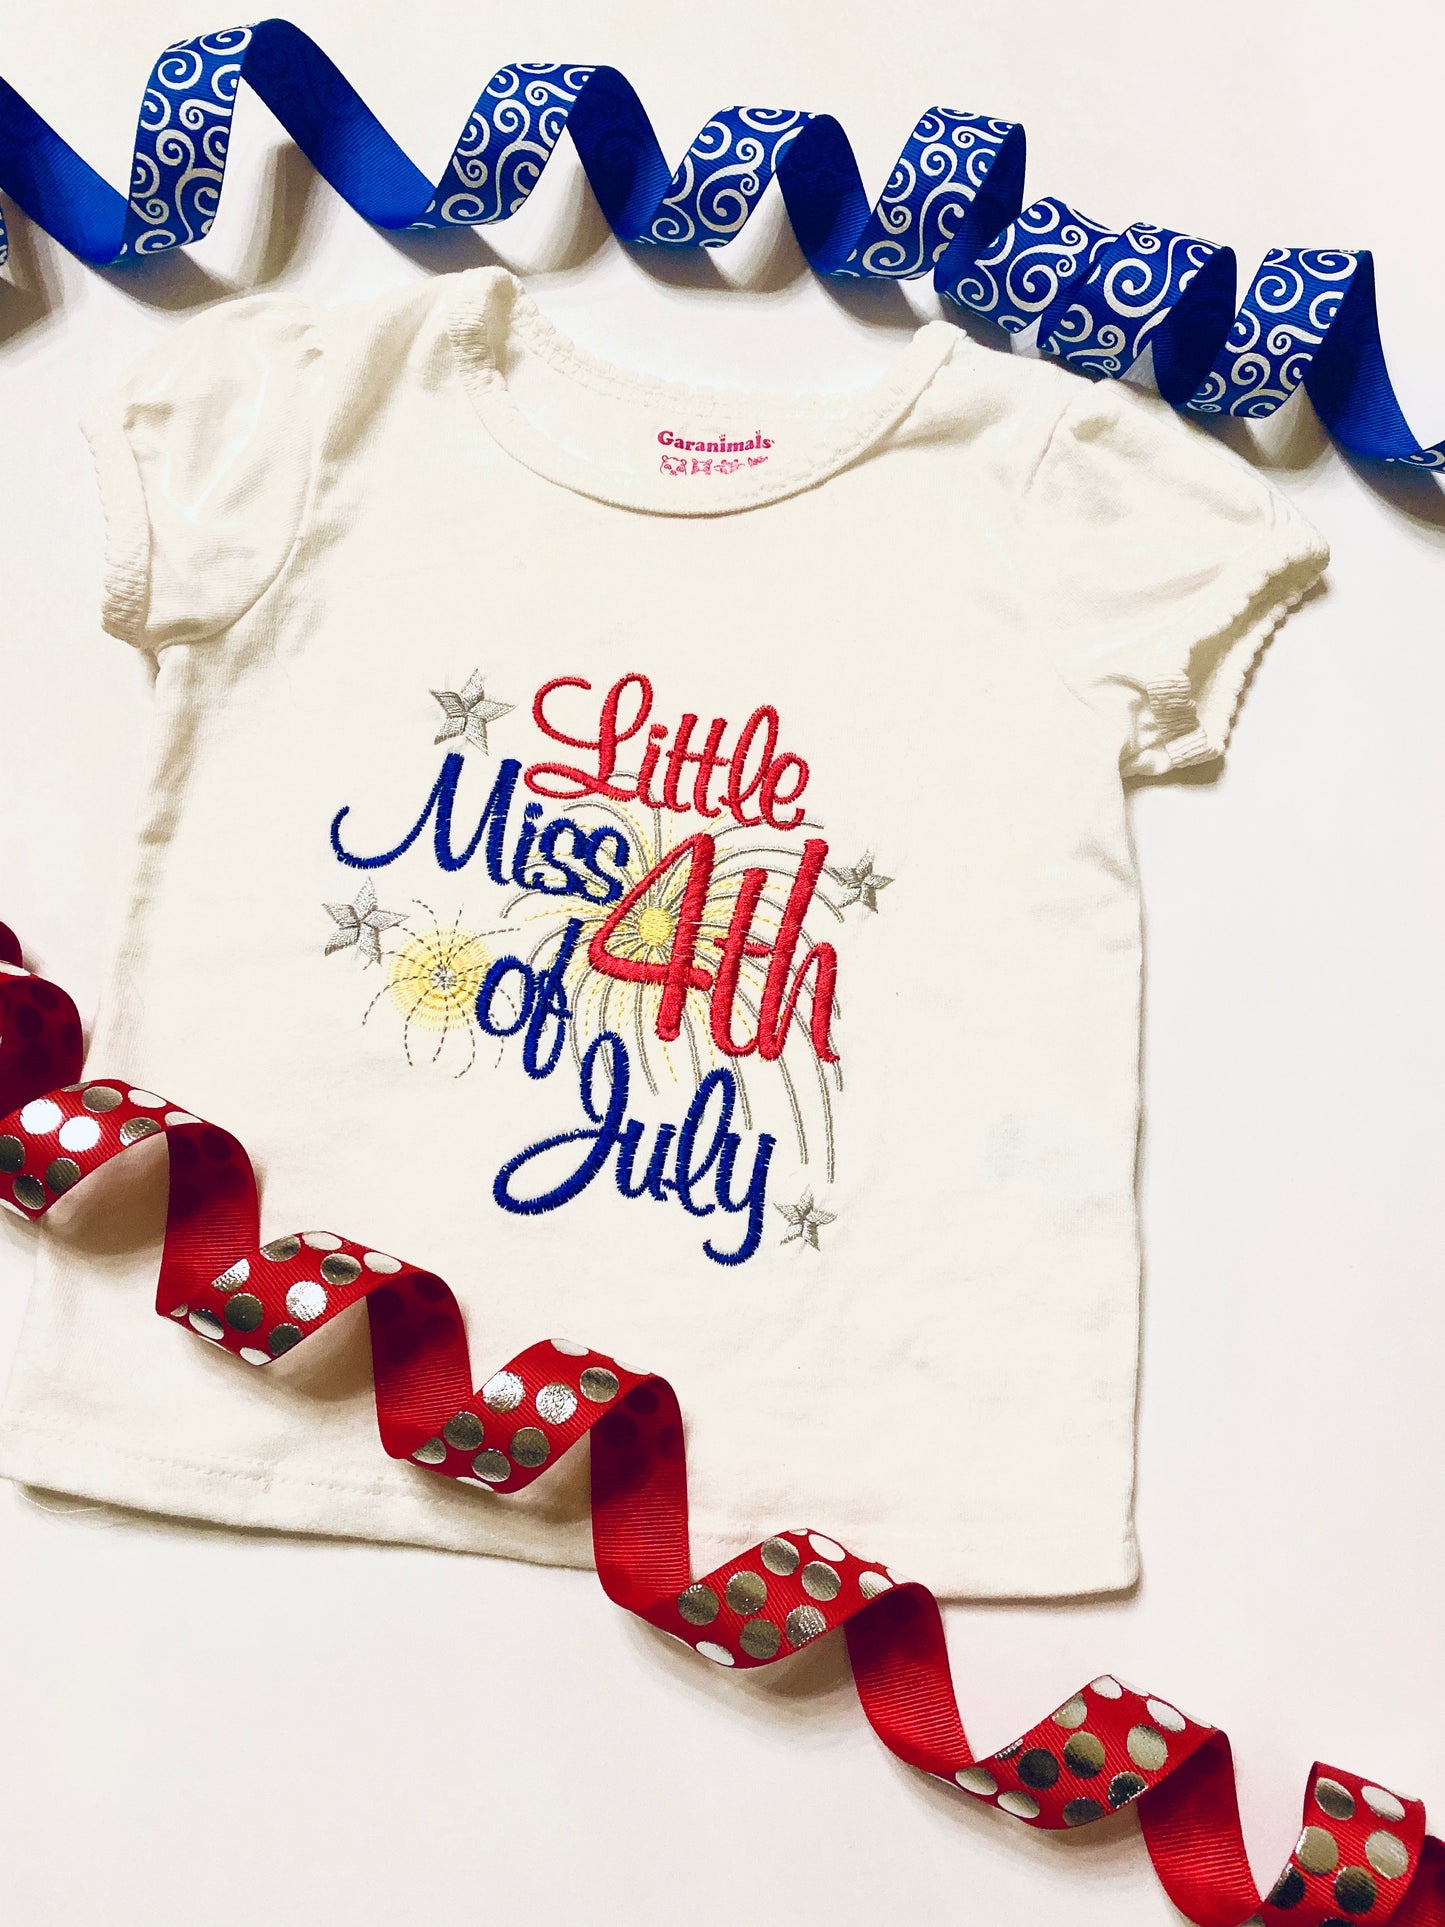 patriotic shirt stitched with red white blue gold and silver thread, reads Little Miss 4th of July Shirt is a white cotton.